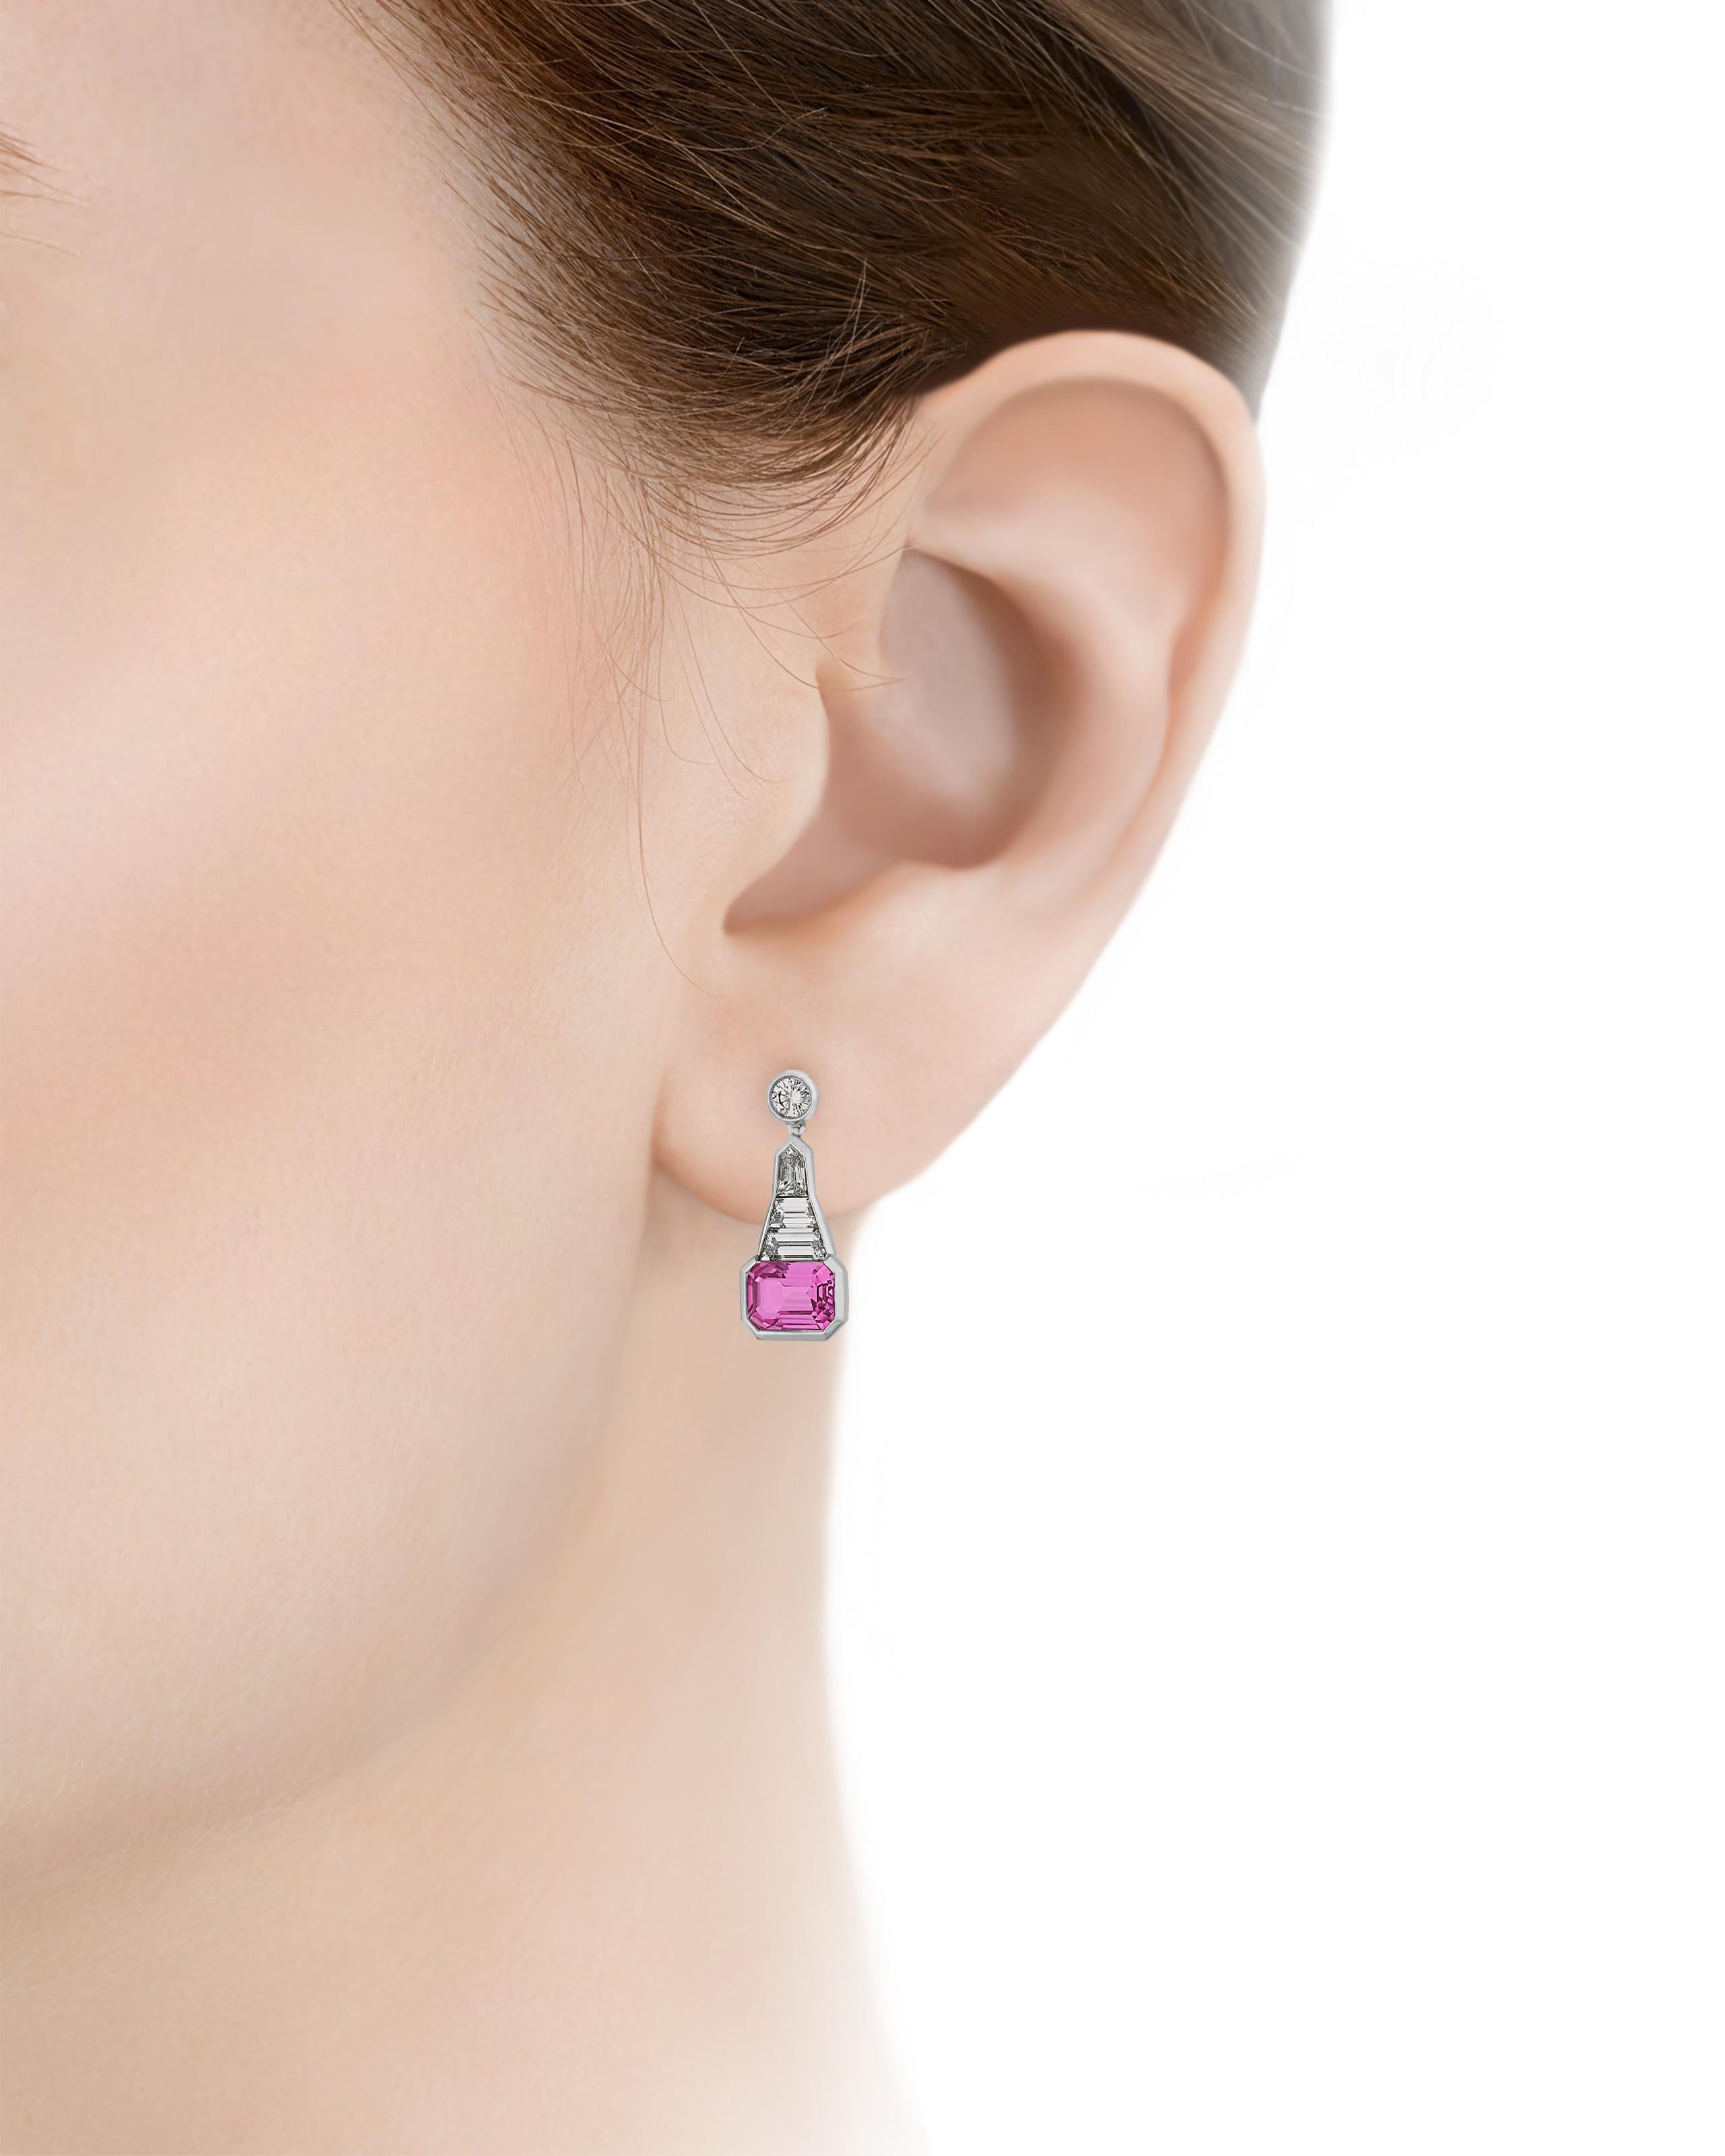 Two eye-catching octagonal step-cut pink sapphires totaling 3.90 carats are set in these elegant drop earrings. The pair dangle from a glistening collection of white diamonds totaling 1.91 carats. Pink sapphires are among the world's most desirable